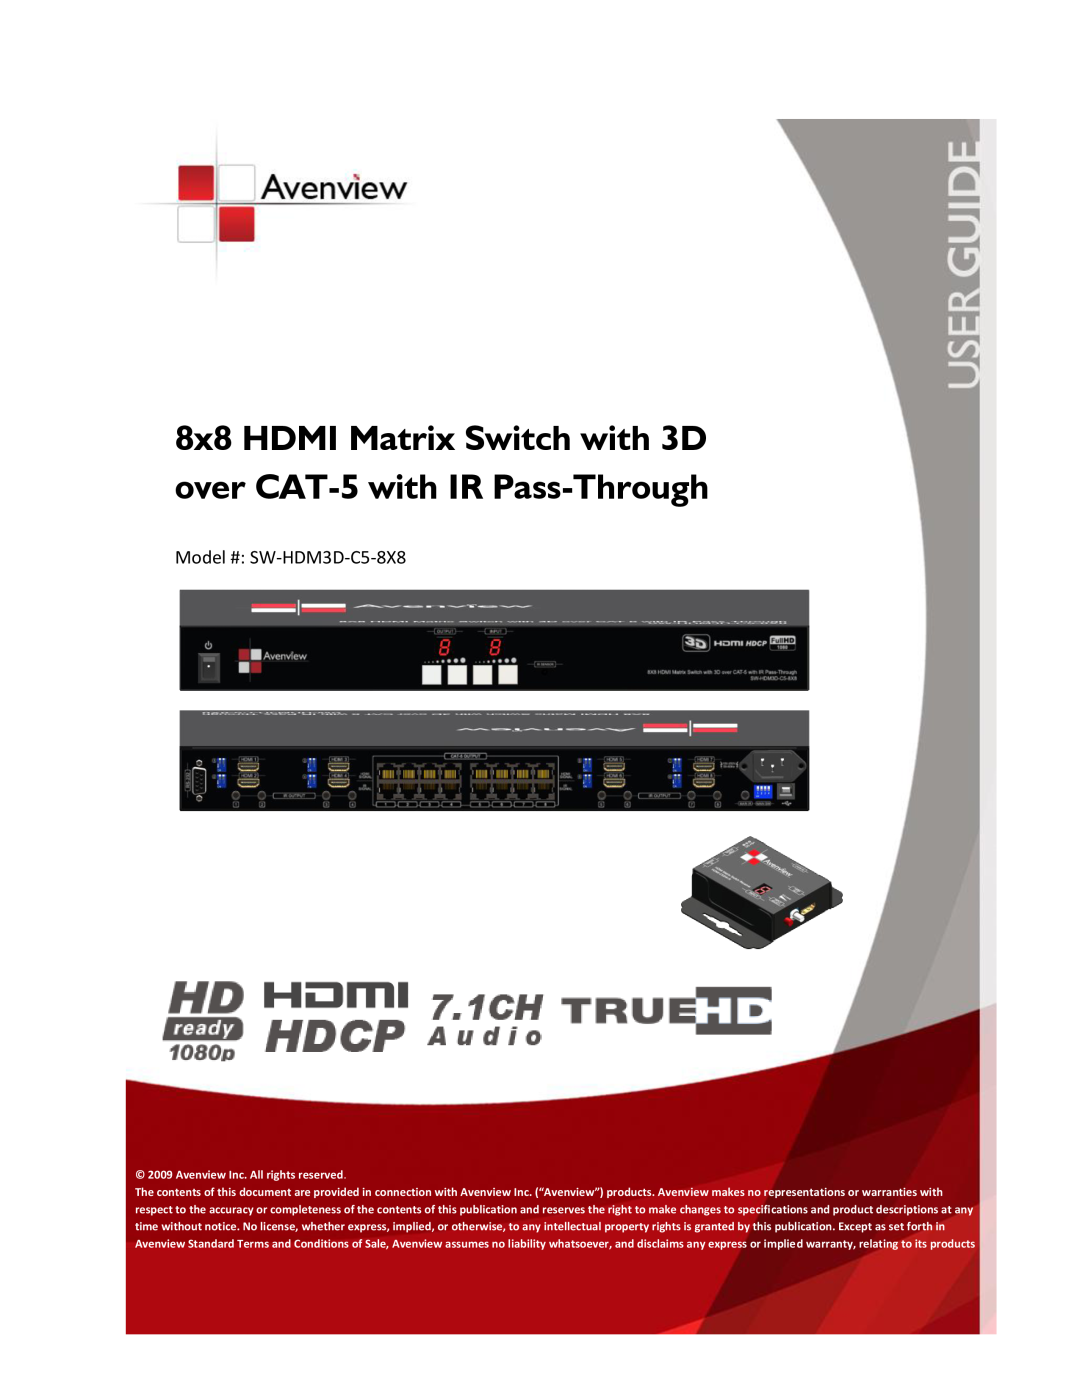 Avenview SW-HDM3D-C5-8X8 specifications 8x8 HDMI Matrix Switch with 3D over CAT-5 with IR Pass-Through 